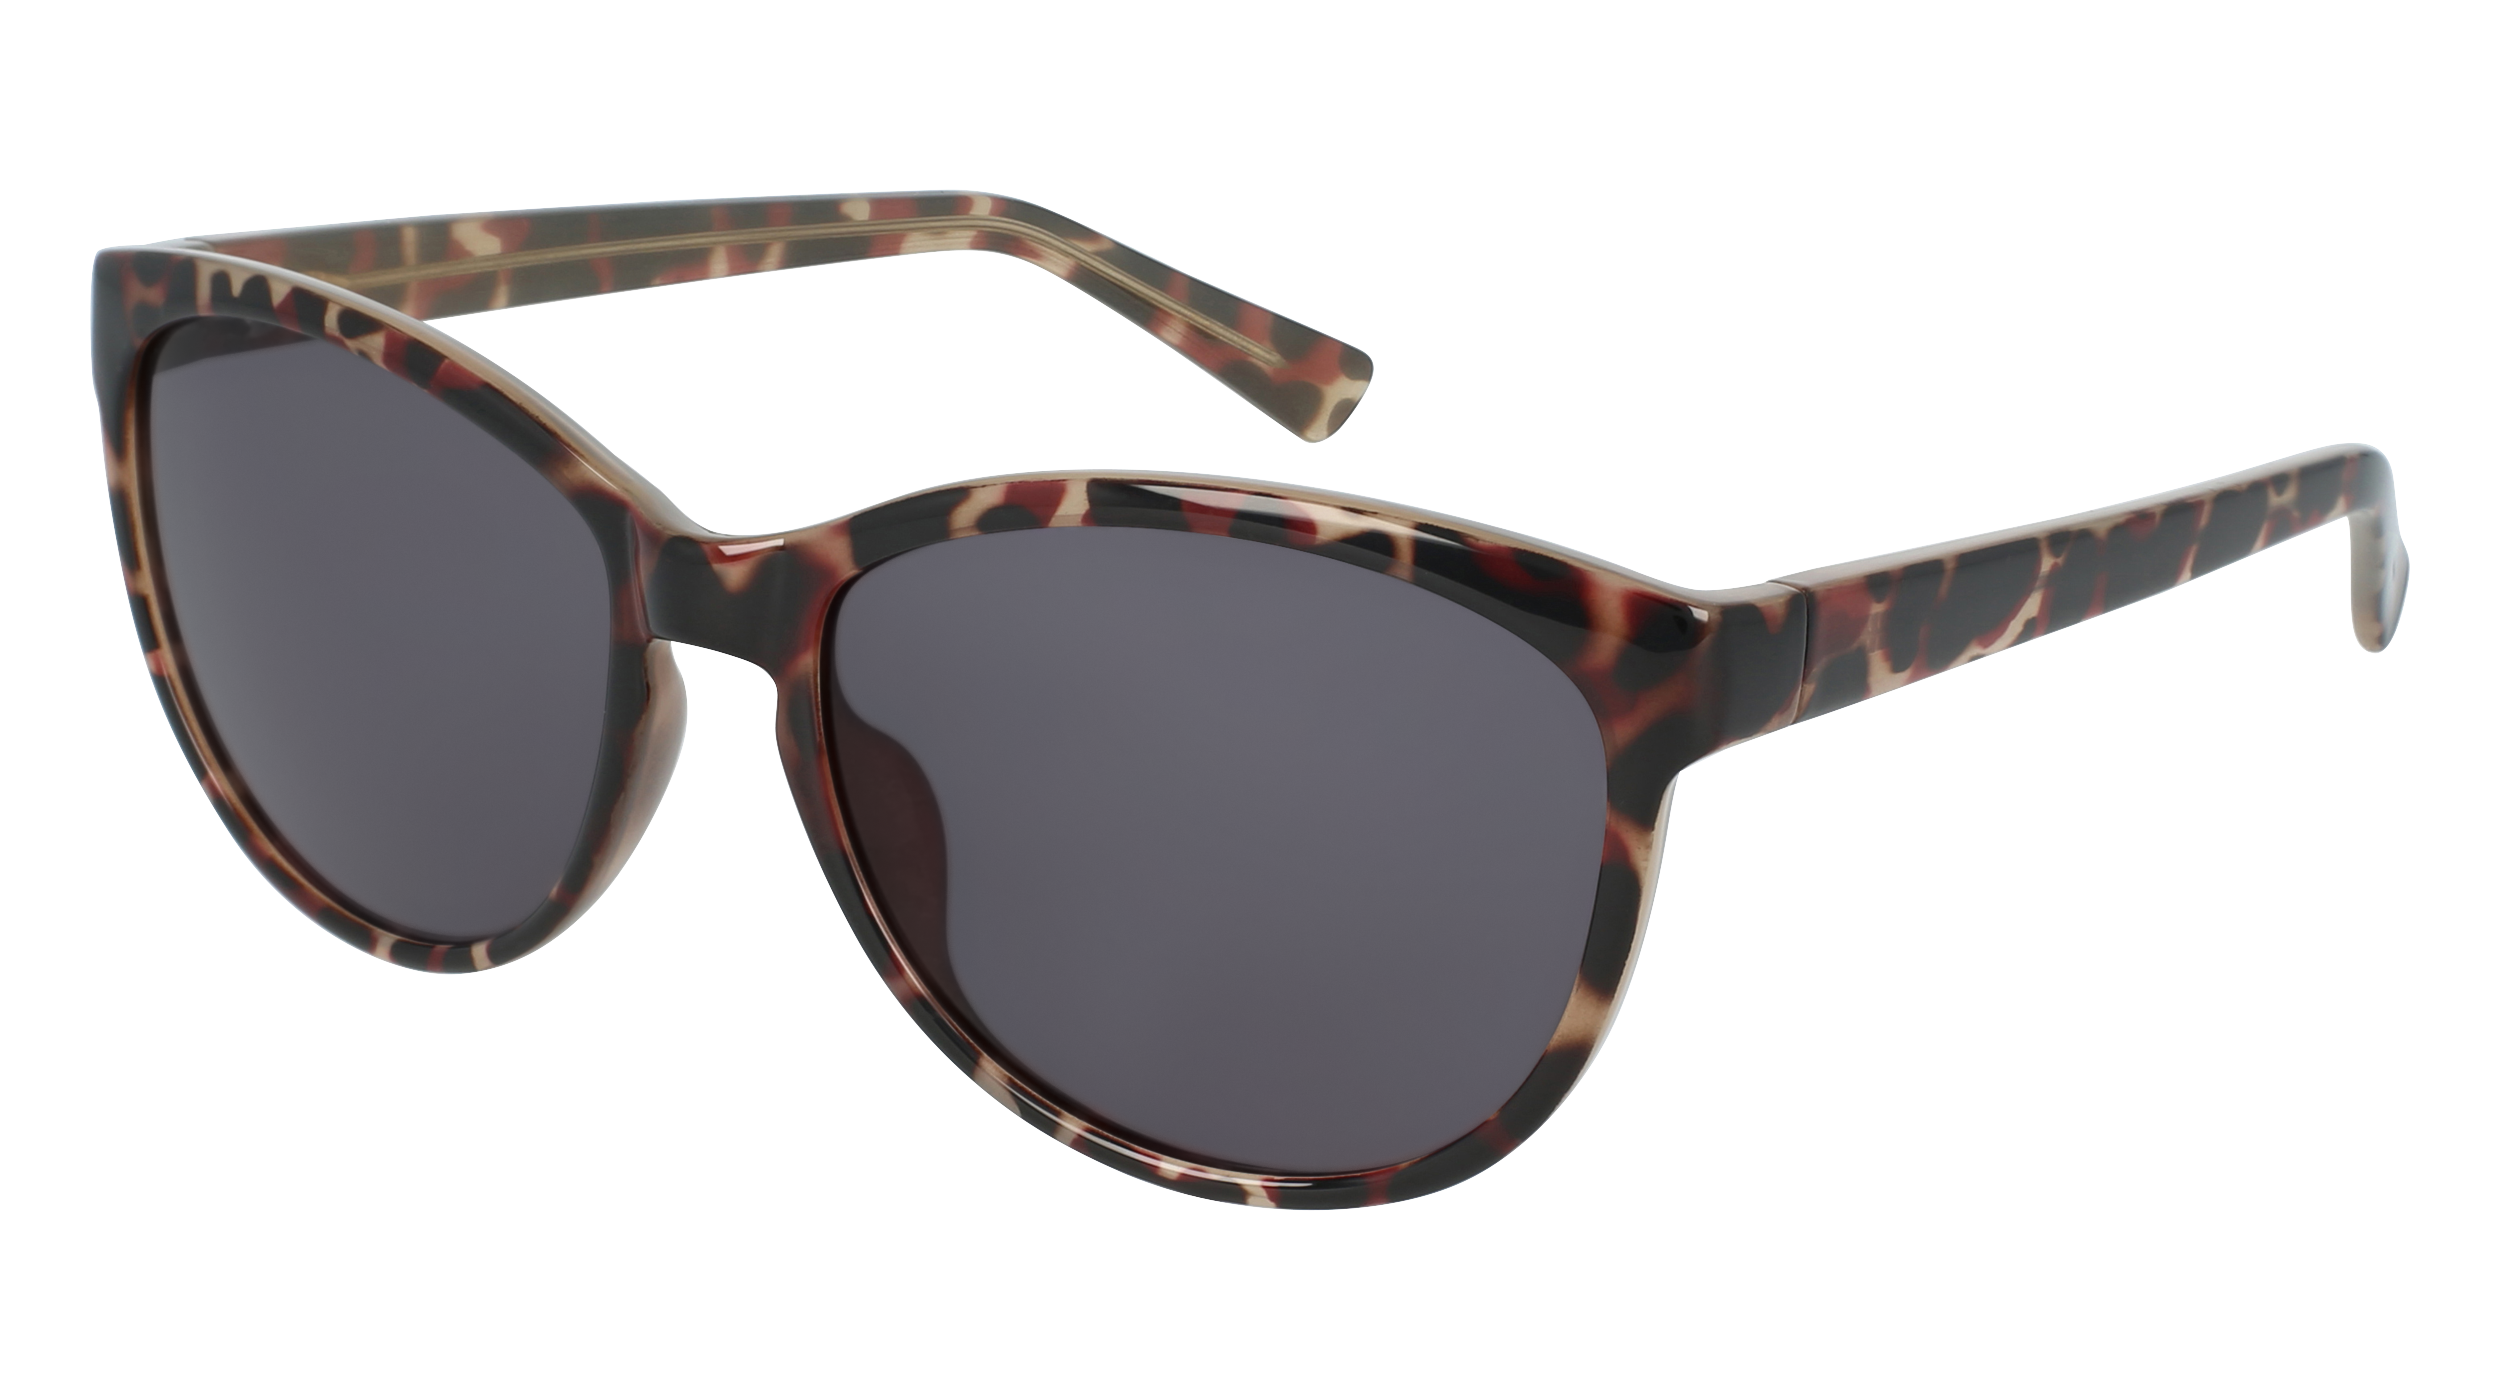 N S 727 women's sunglasses (from the side)